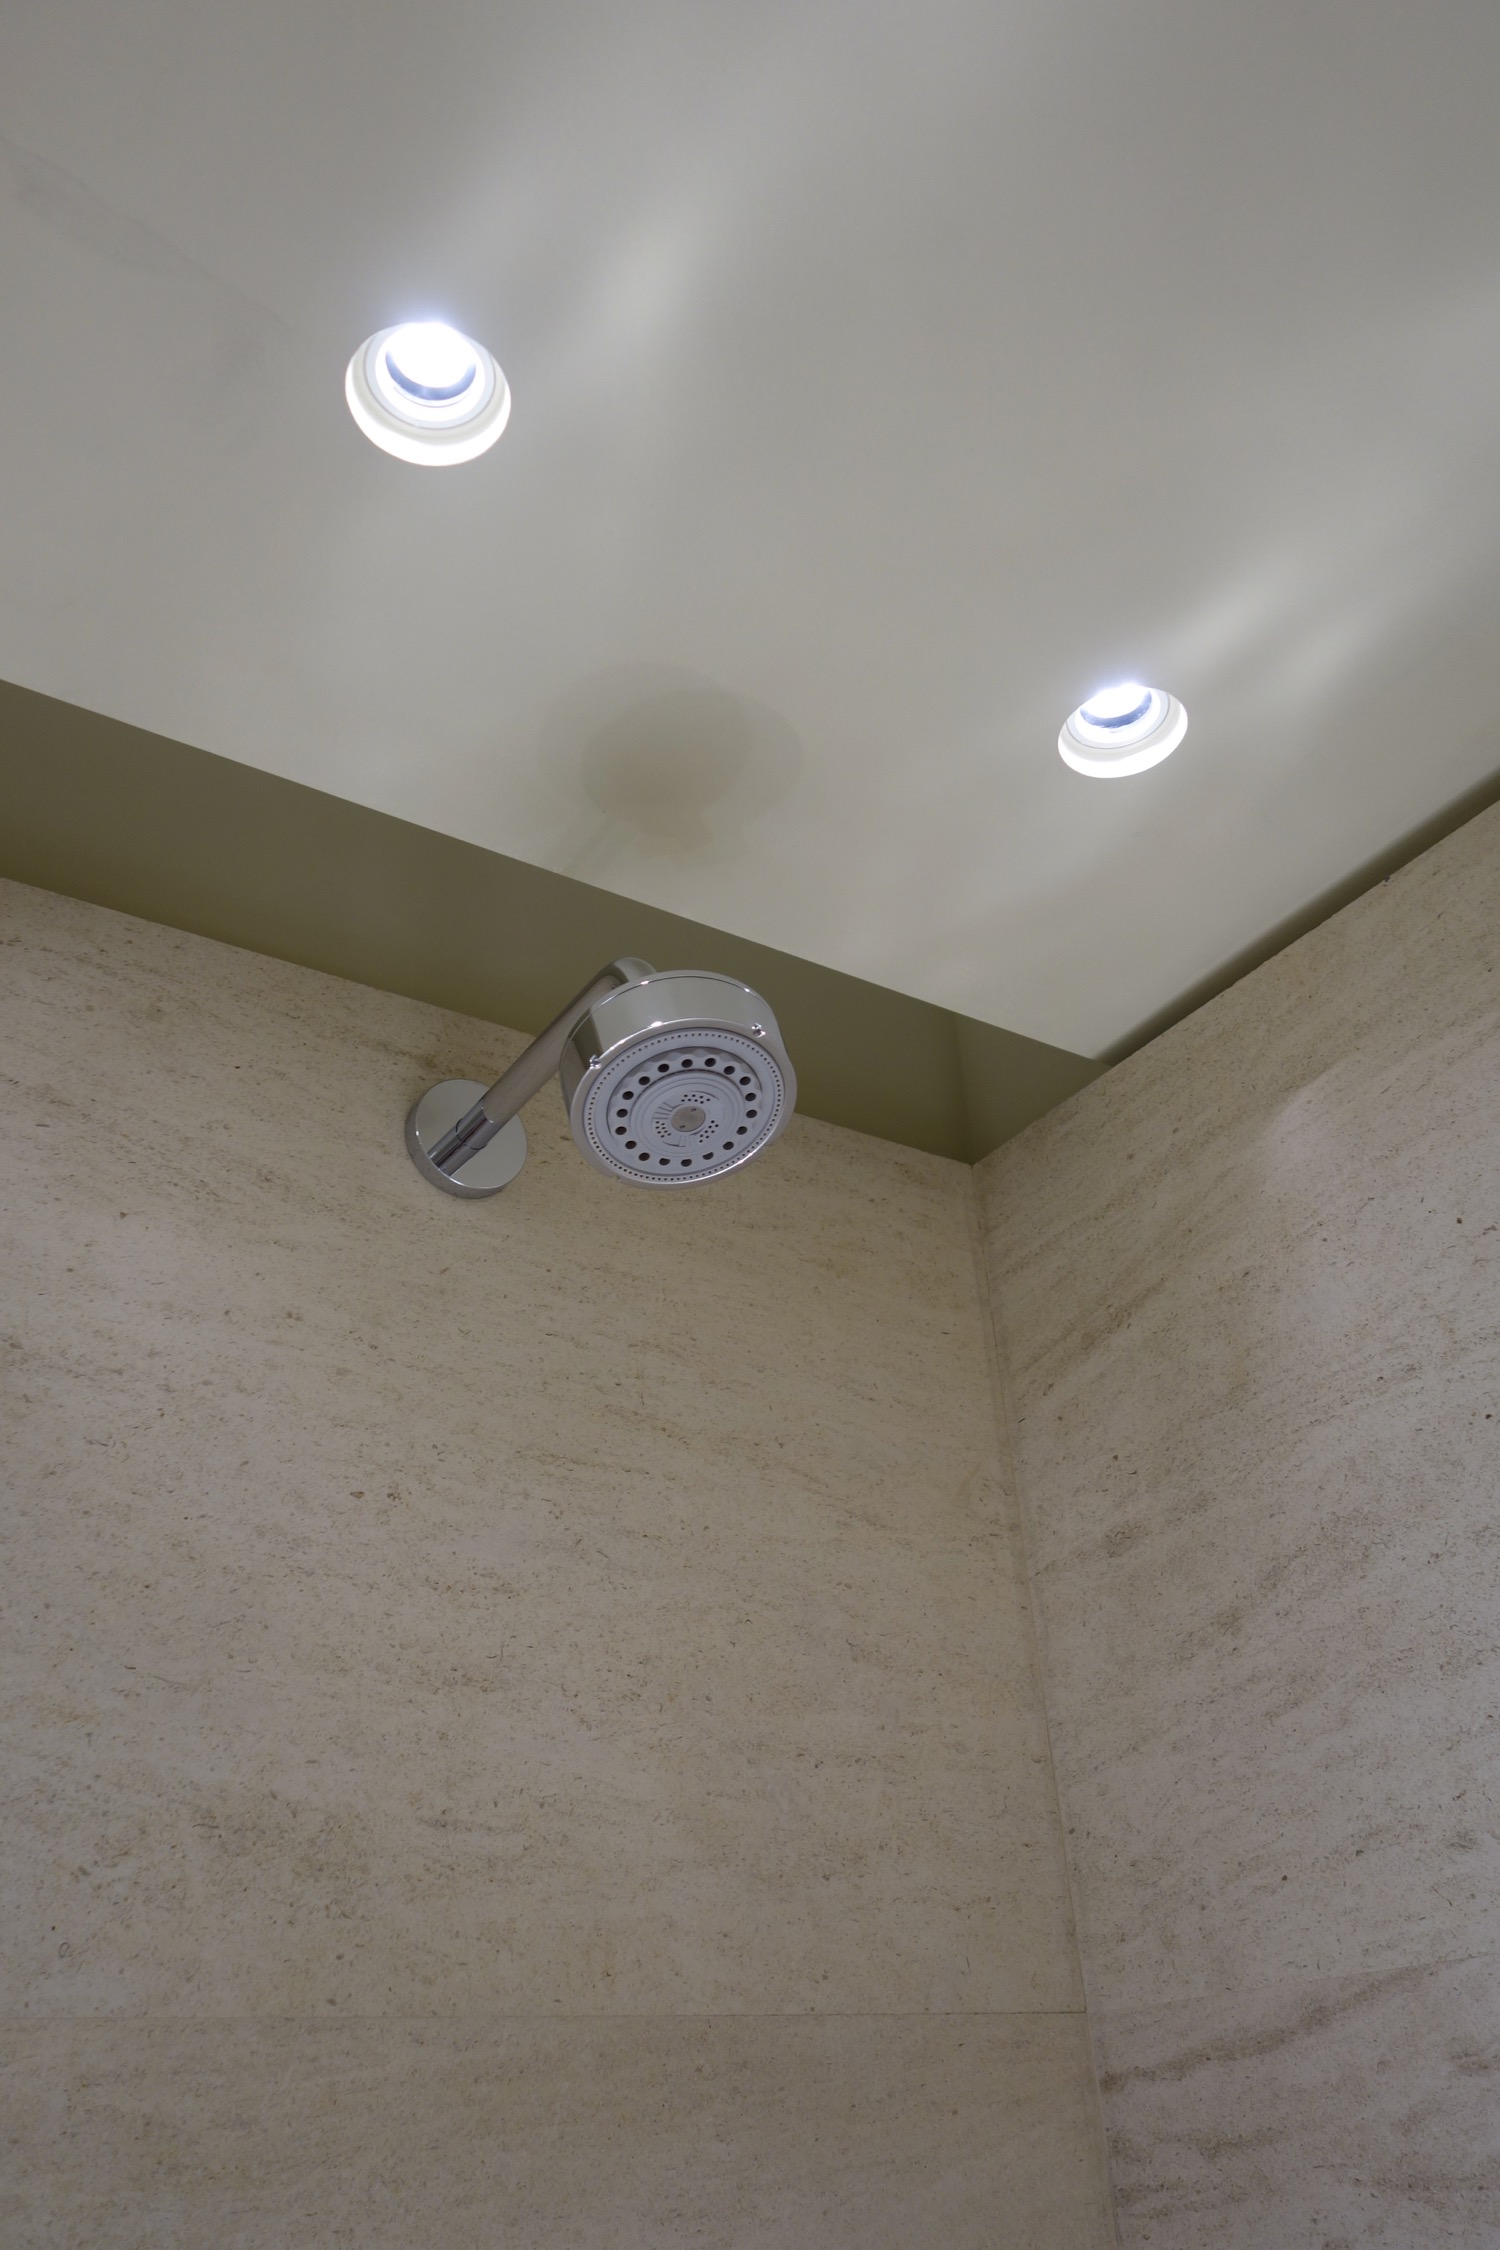 a shower head with lights on the ceiling